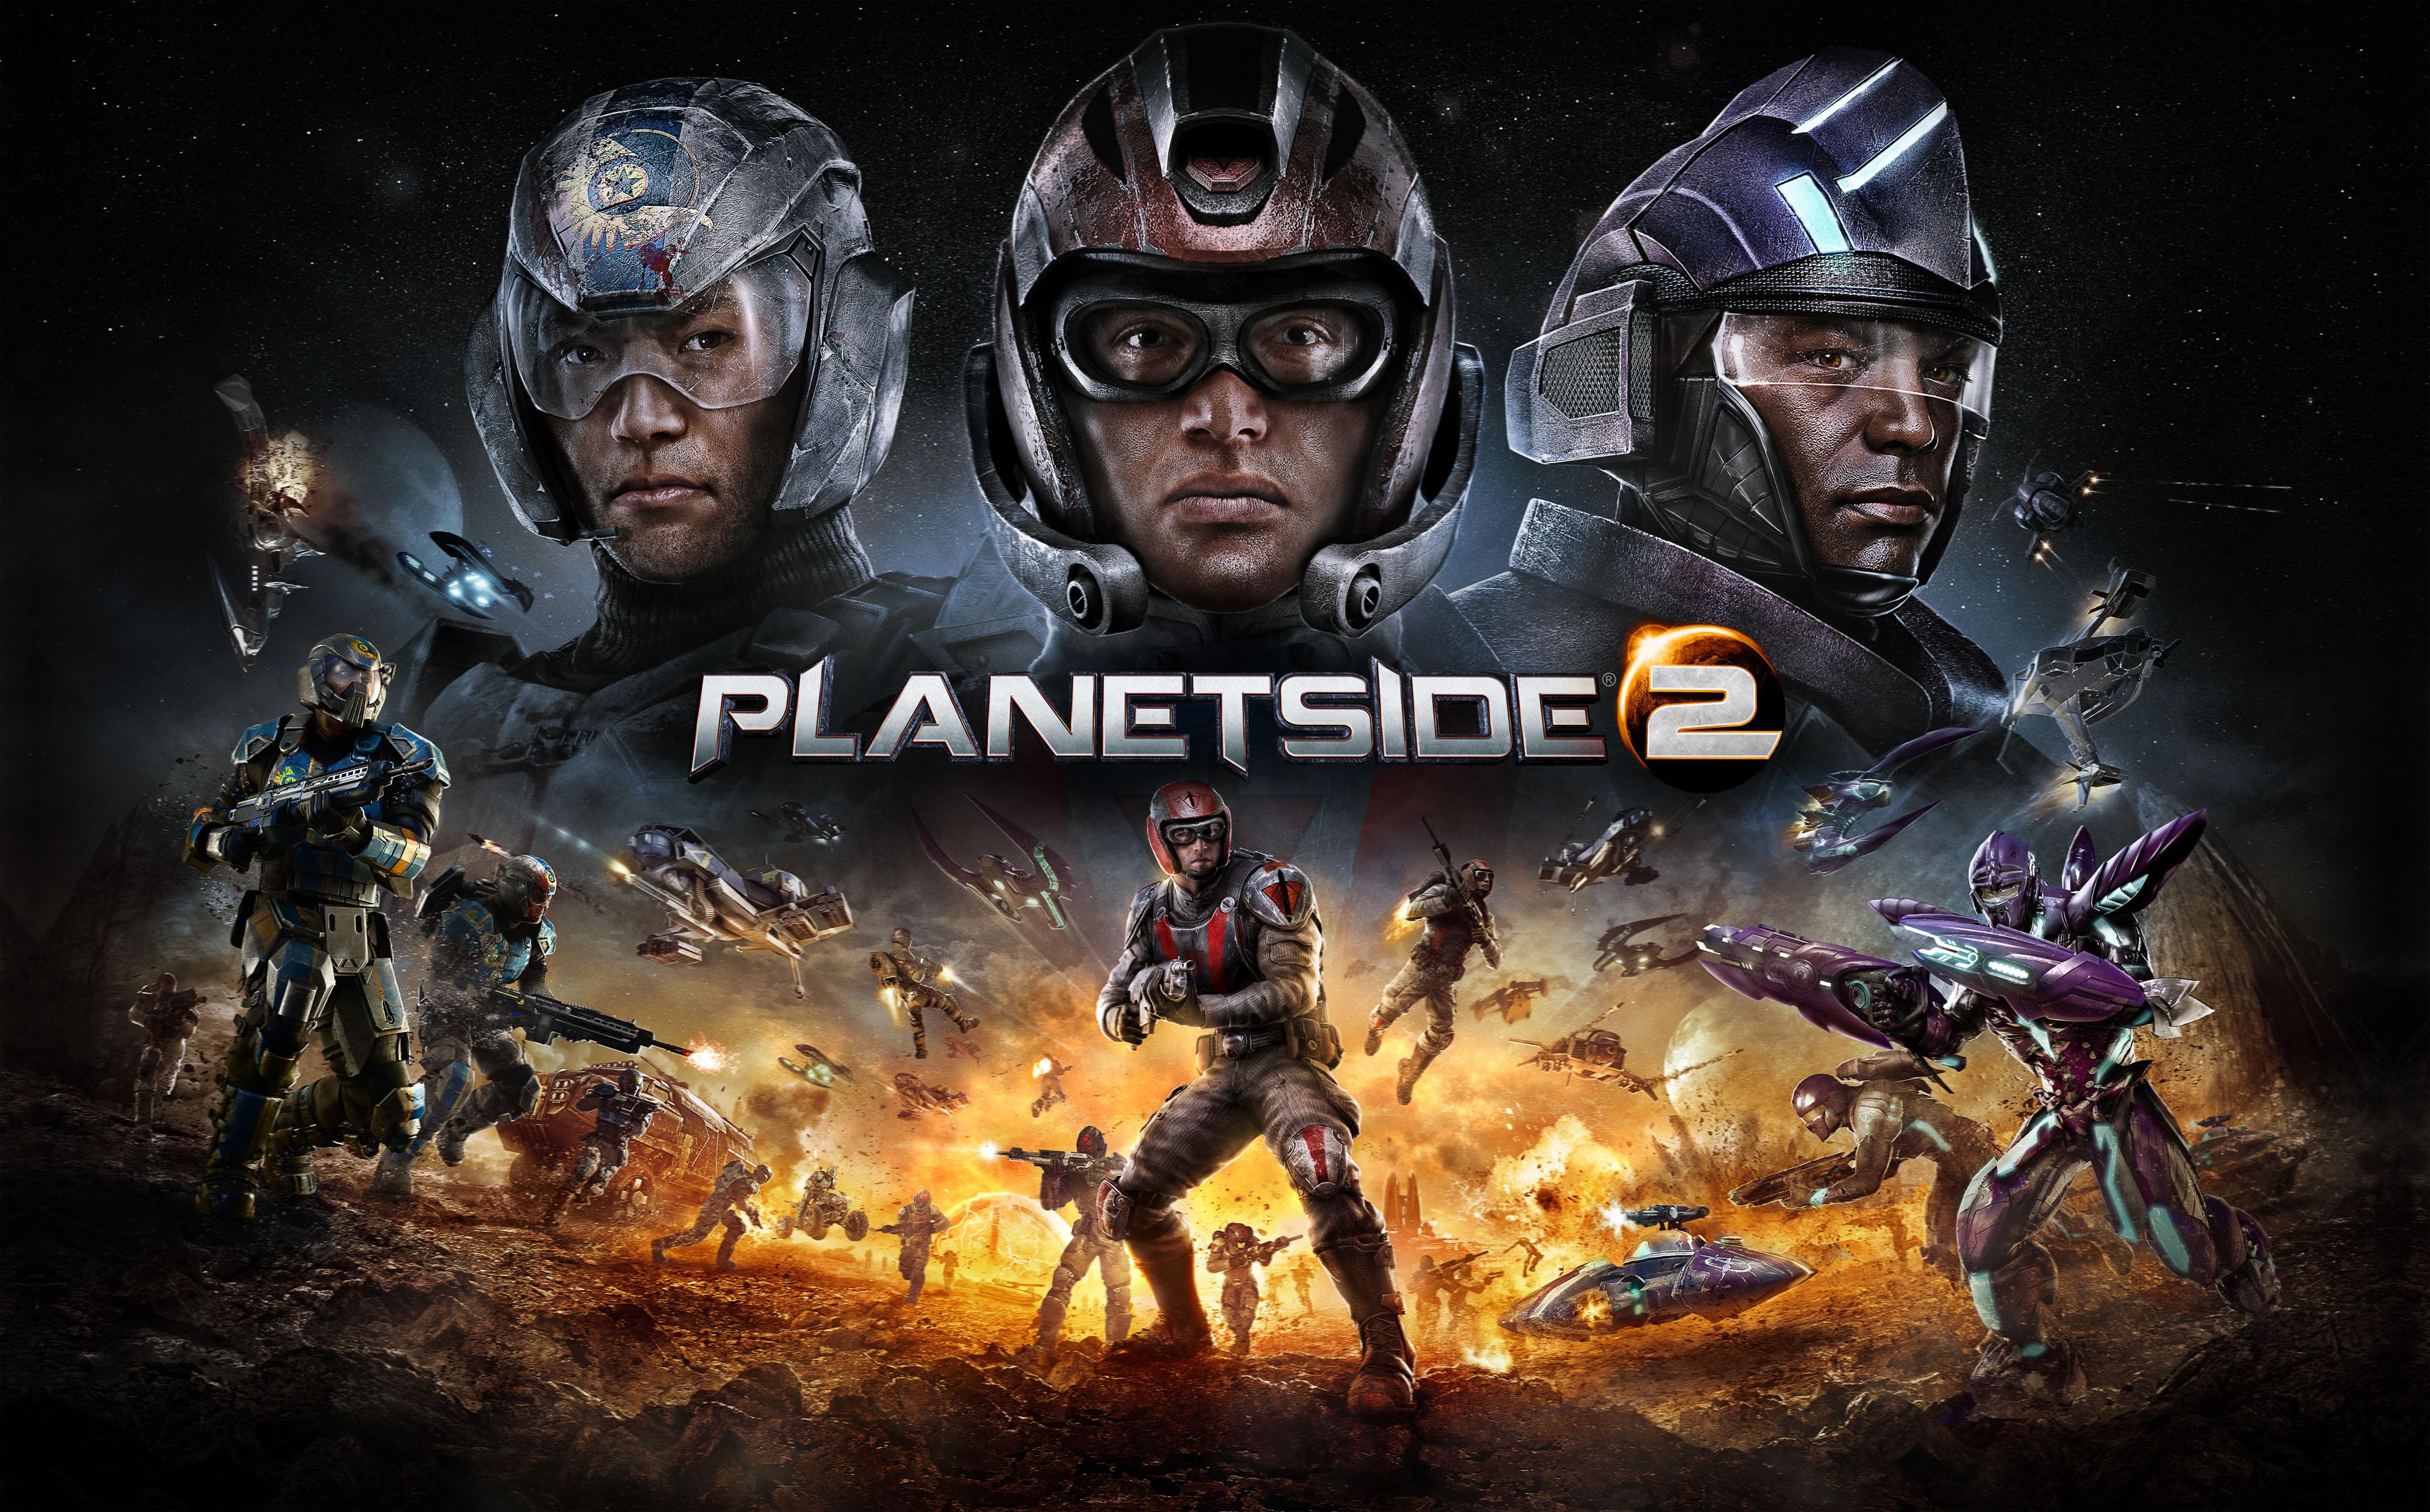 Planetside IP sold to shell company as it was considered “non-core IP”